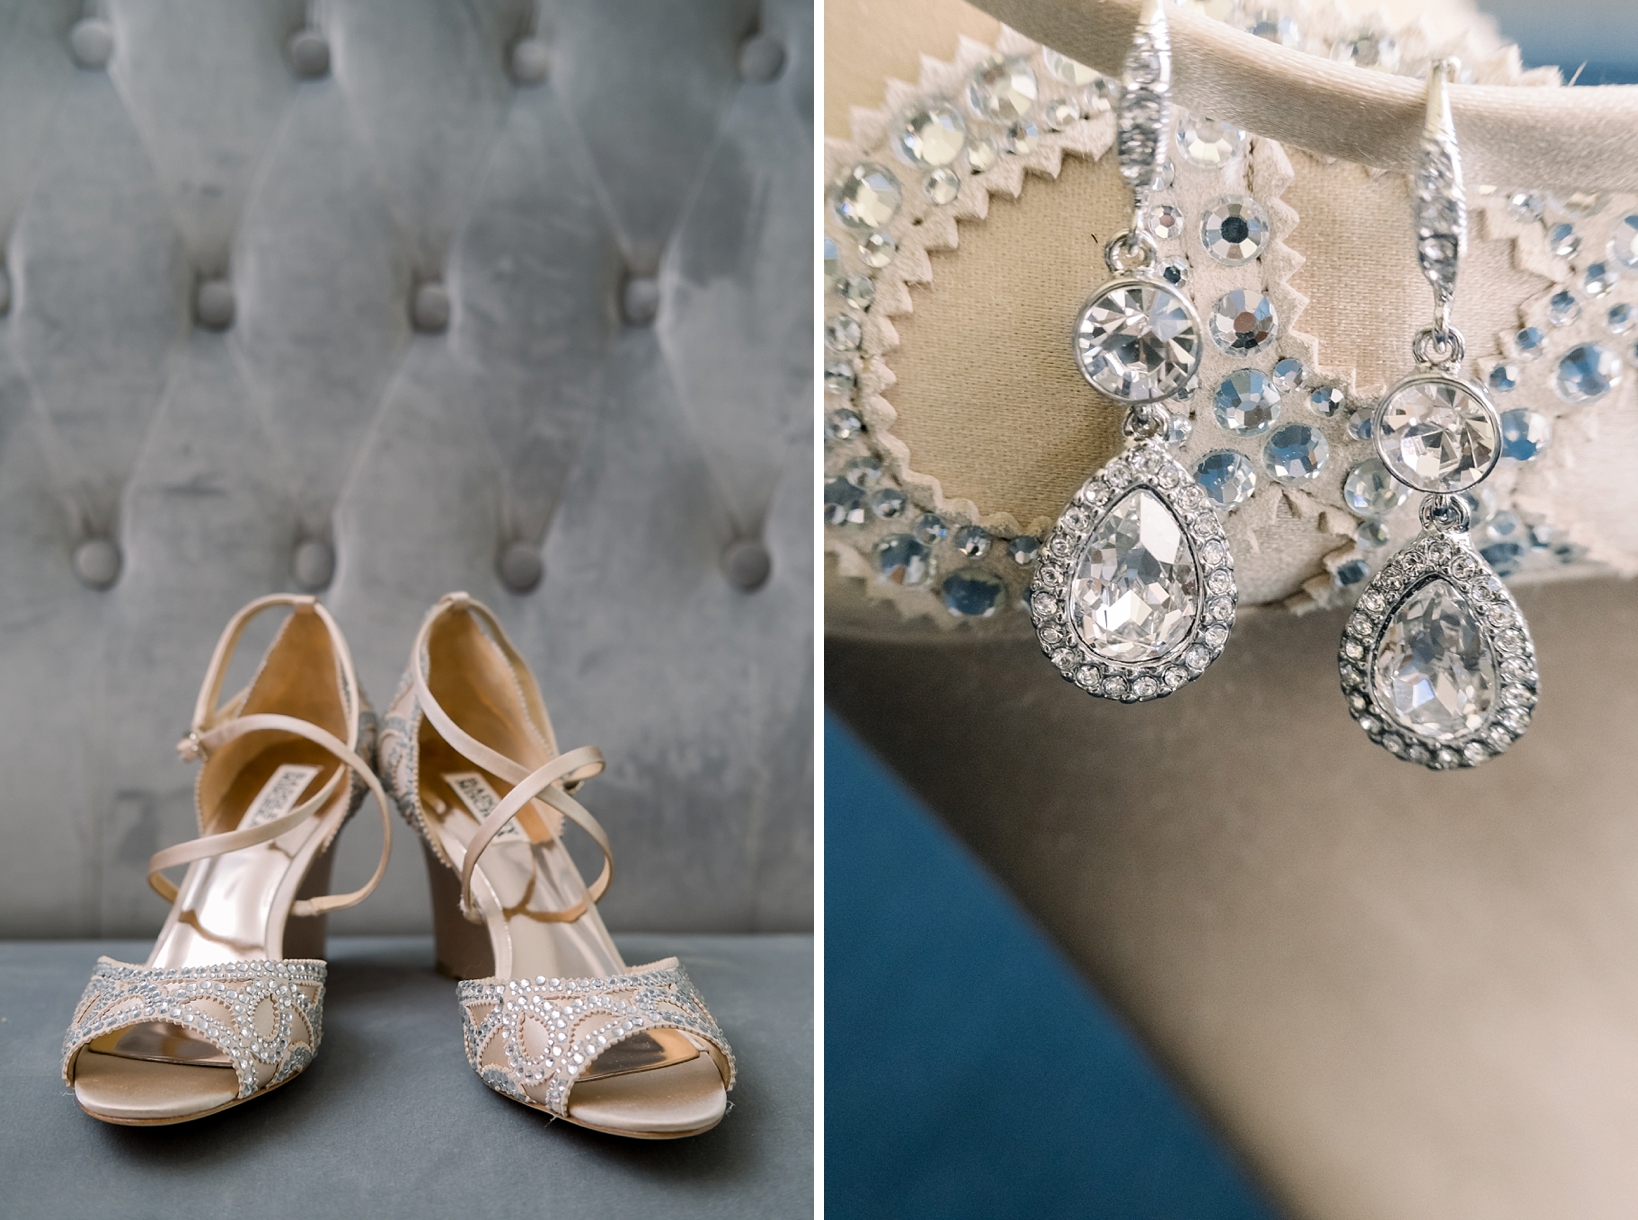 The Bride's shoes and her diamond earrings on a tufted chair in the Bridal suite